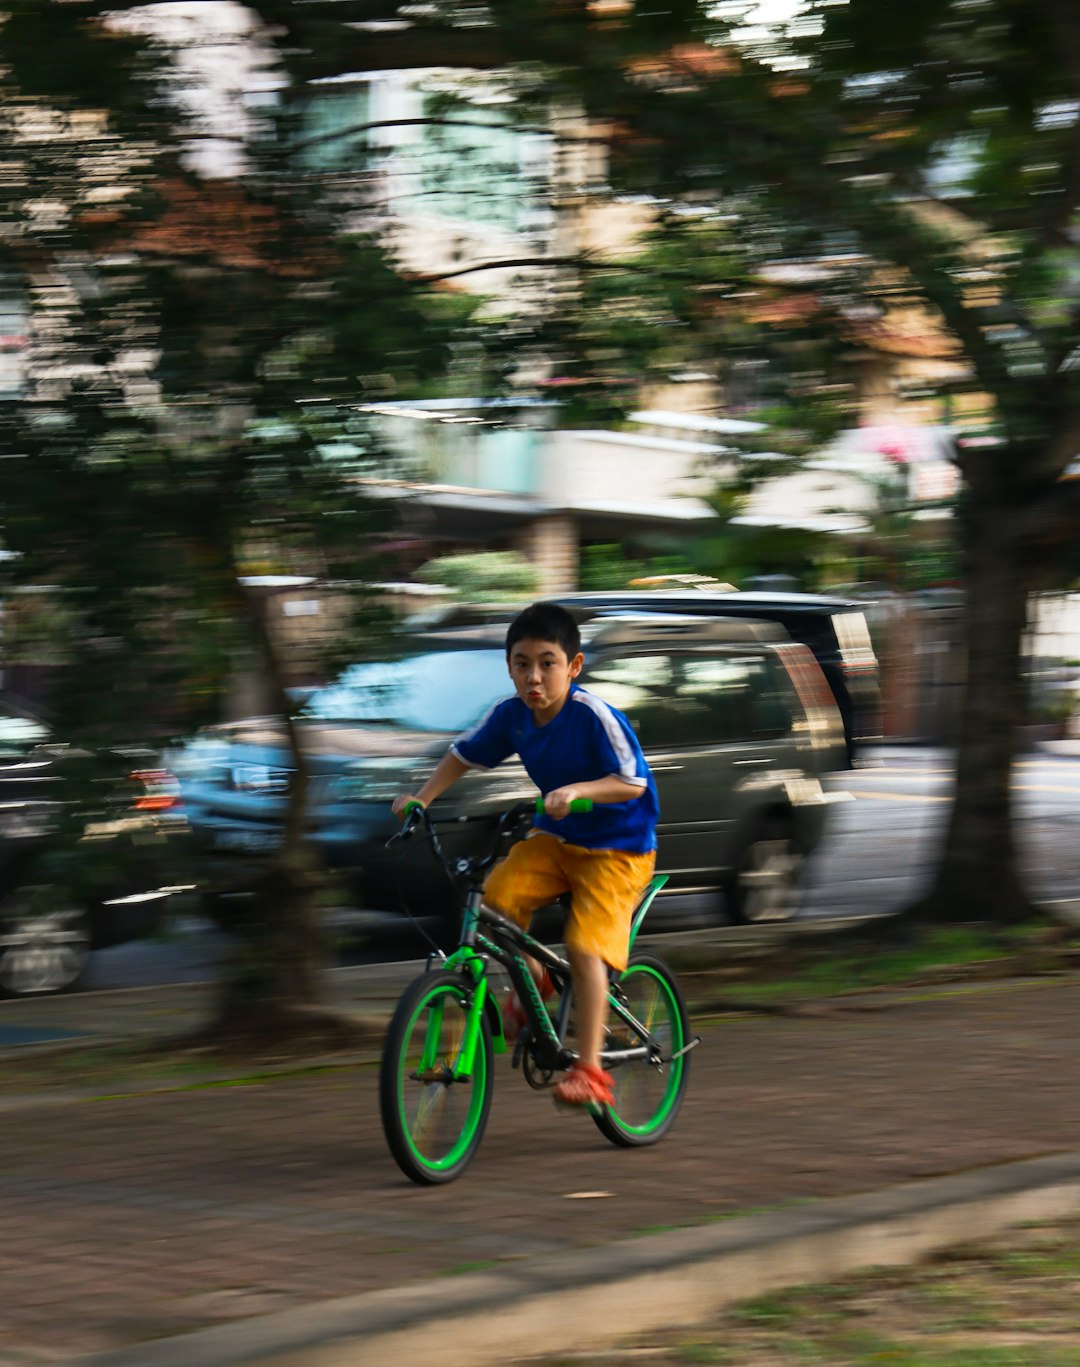 man in blue and white shirt riding on green bicycle during daytime